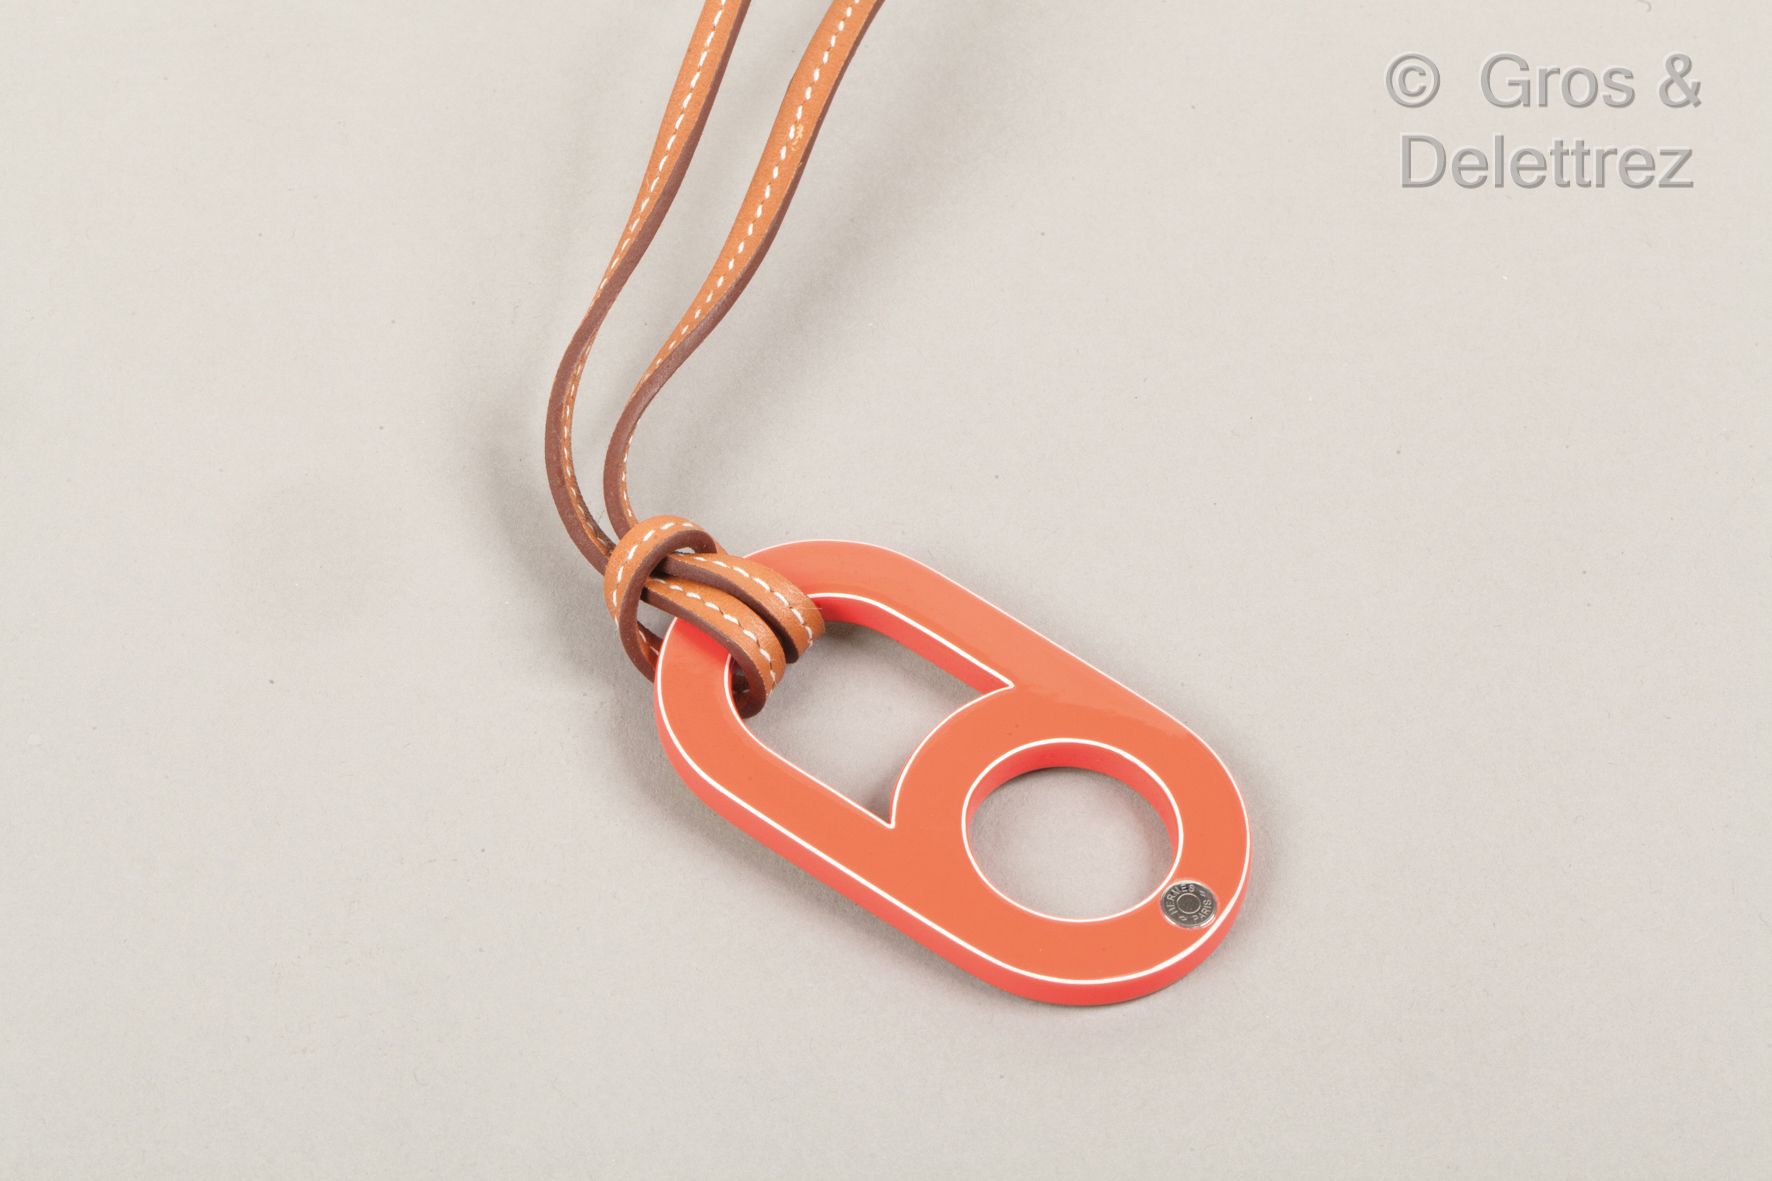 HERMES Paris made in Vietnam Pendant "Variation" in yellow lacquered wood, coral&hellip;